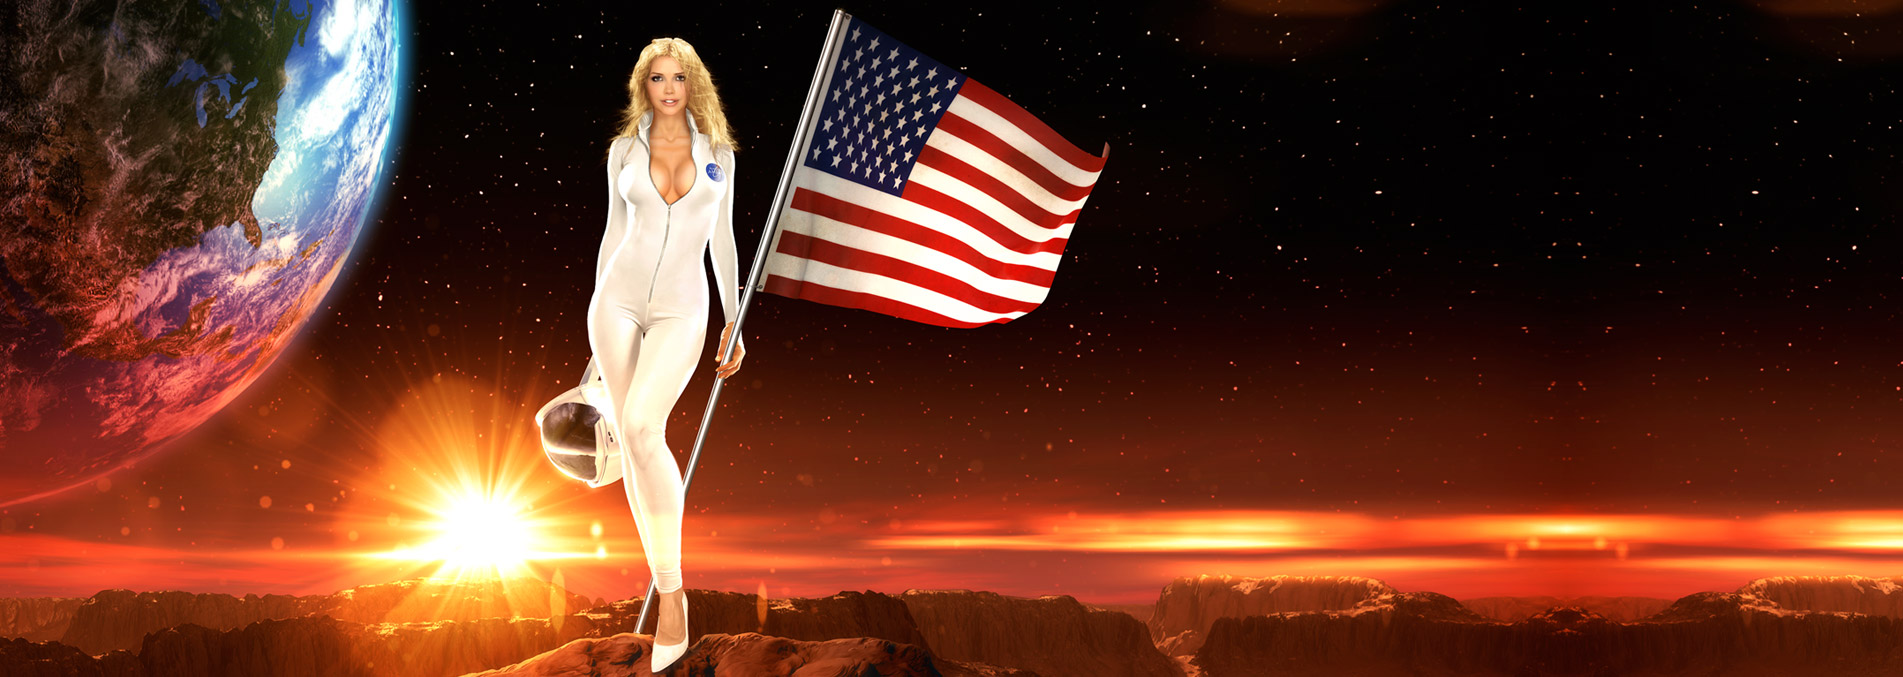 Splash image of a sexy blonde holding the American flag